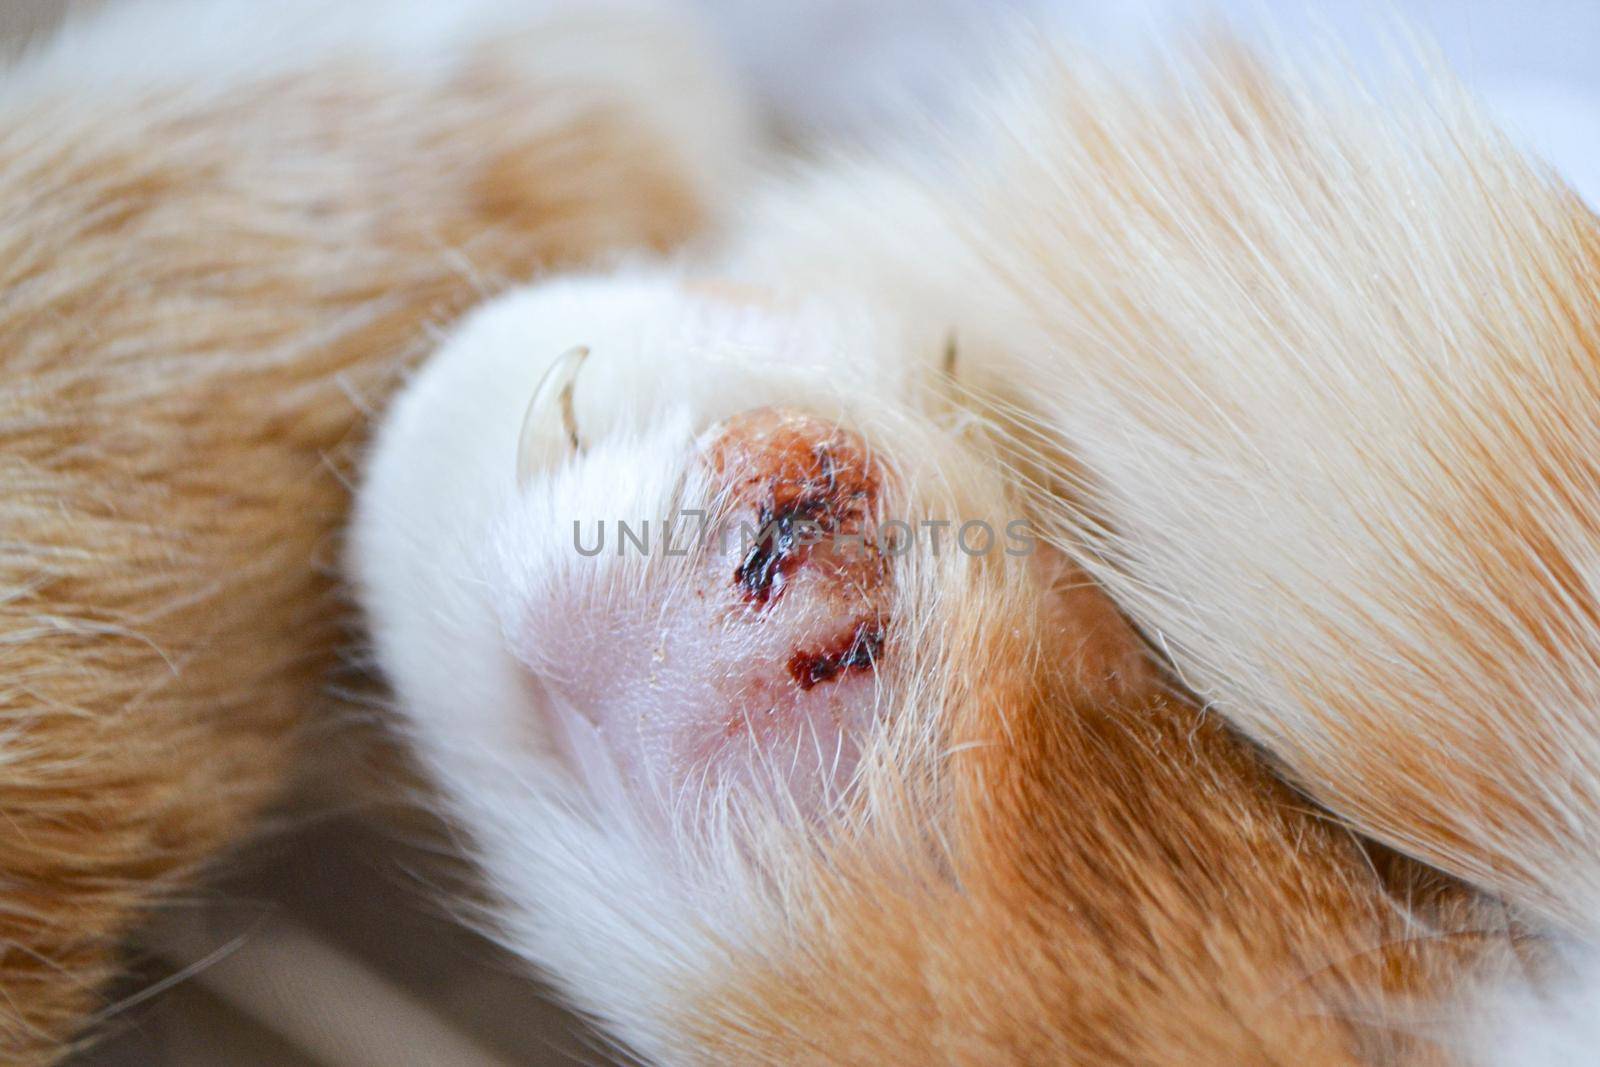 Paw of a sick bright orange cat. Cat's feet are wounds. High quality photo